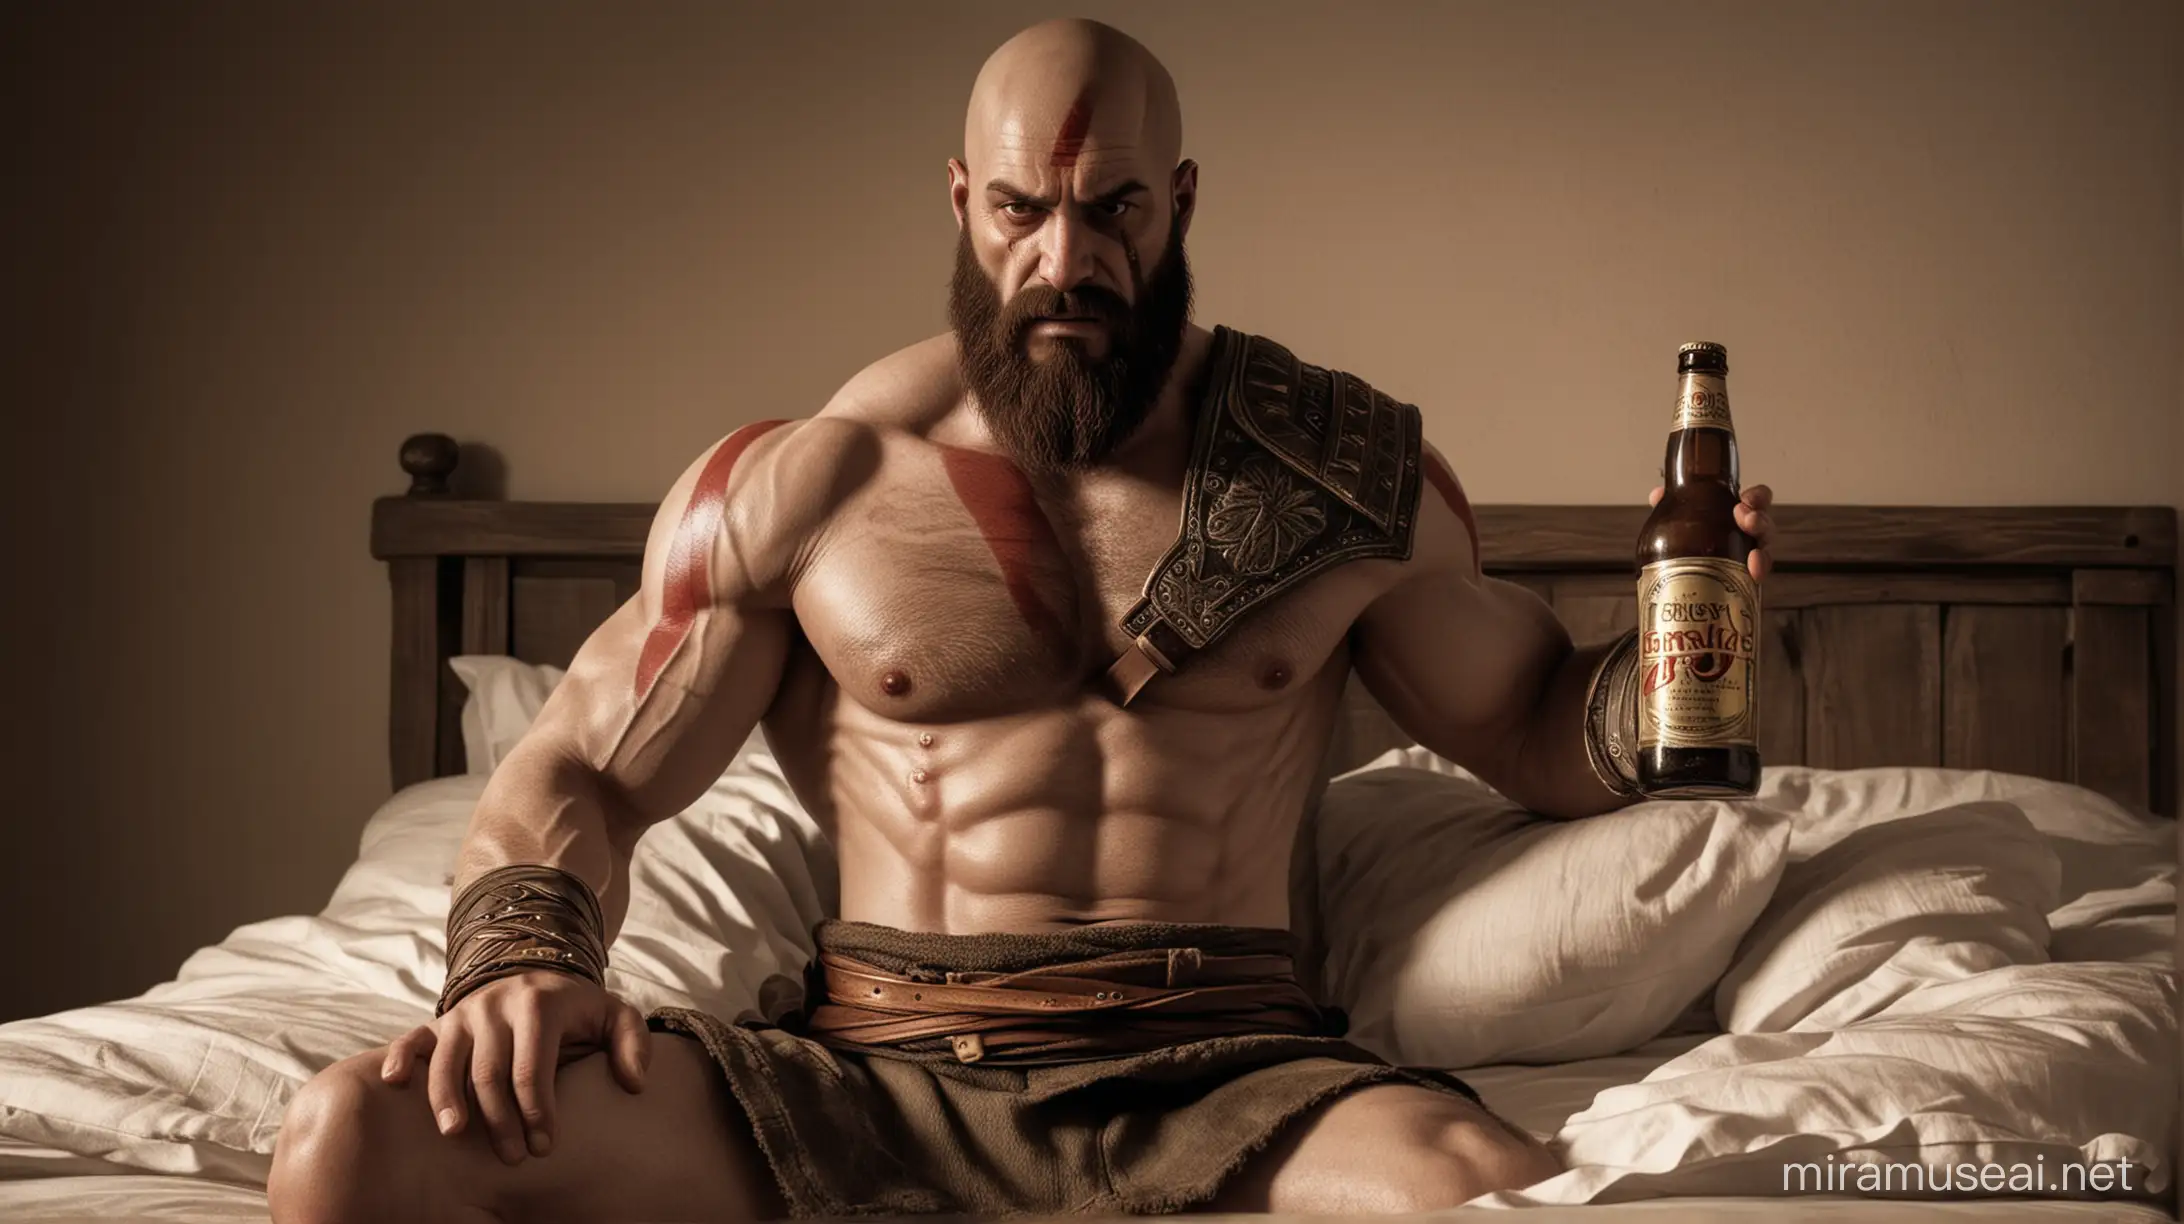 Kratos, lean body, a beer bottle in his hands, feeling depressed Infront of his sleeping bed, image hd 
